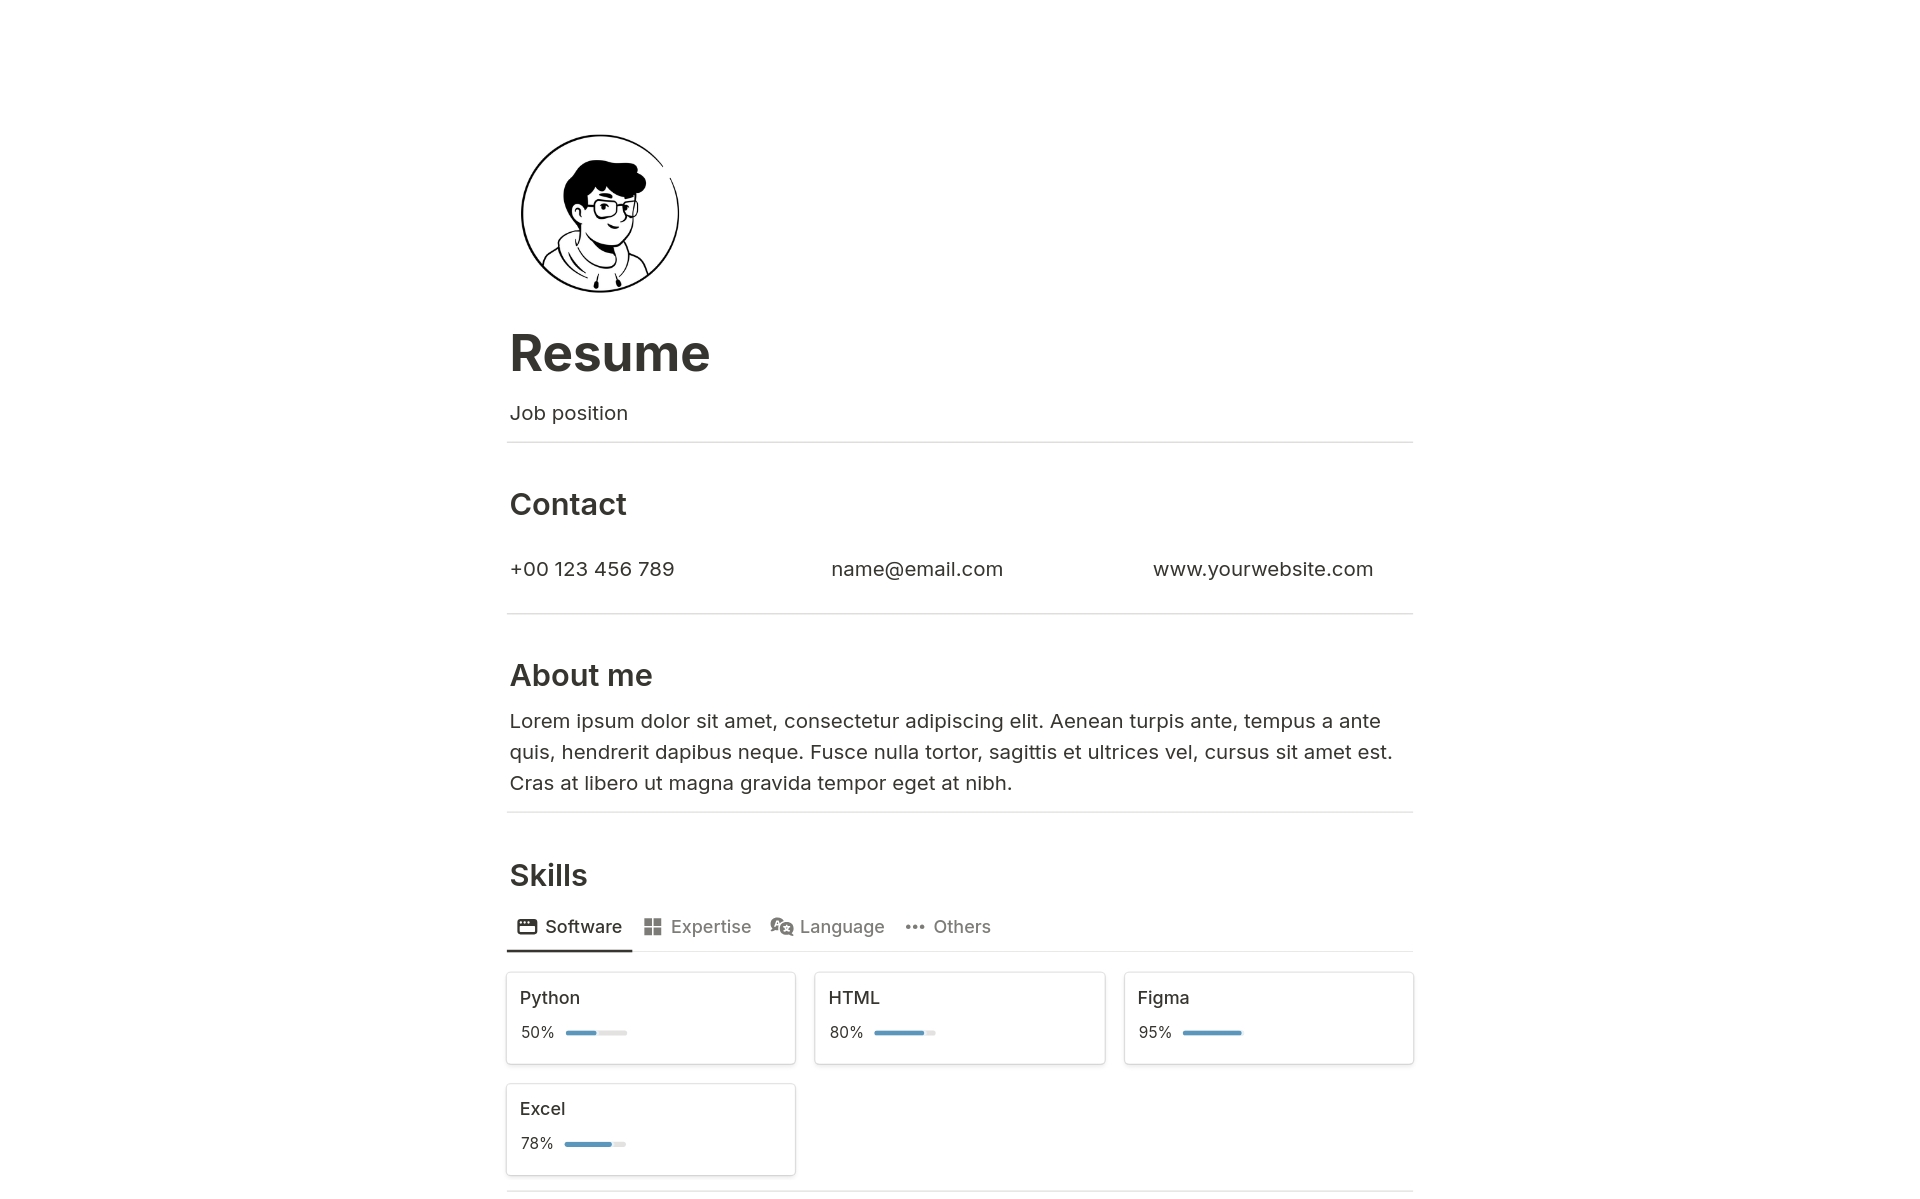 Create a professional easily editable resume in Notion